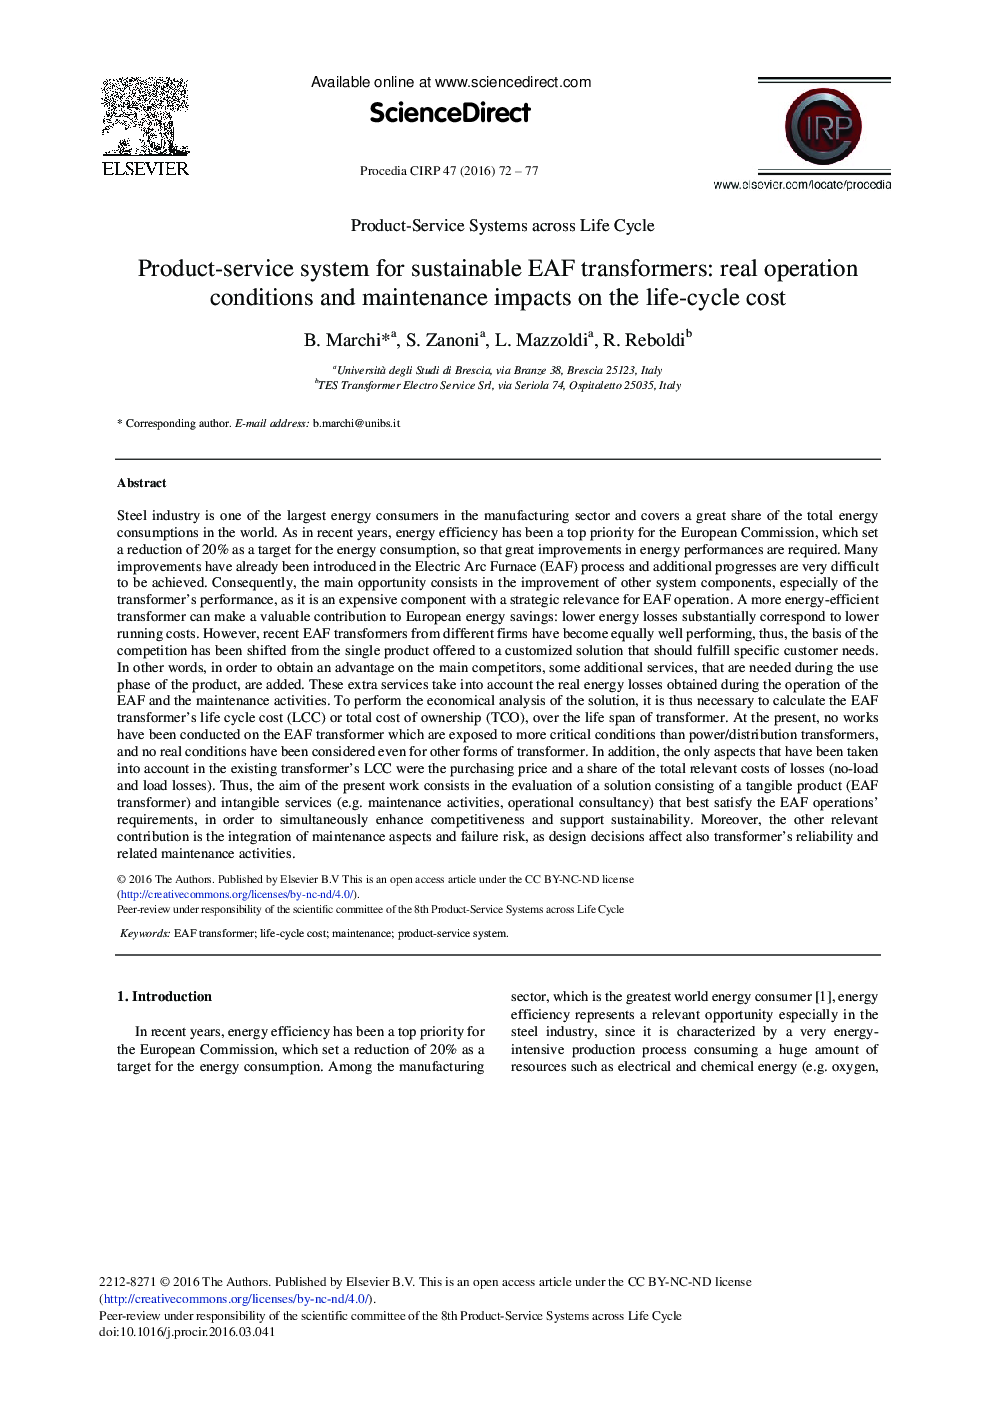 Product-service System for Sustainable EAF Transformers: Real Operation Conditions and Maintenance Impacts on the Life-cycle Cost 